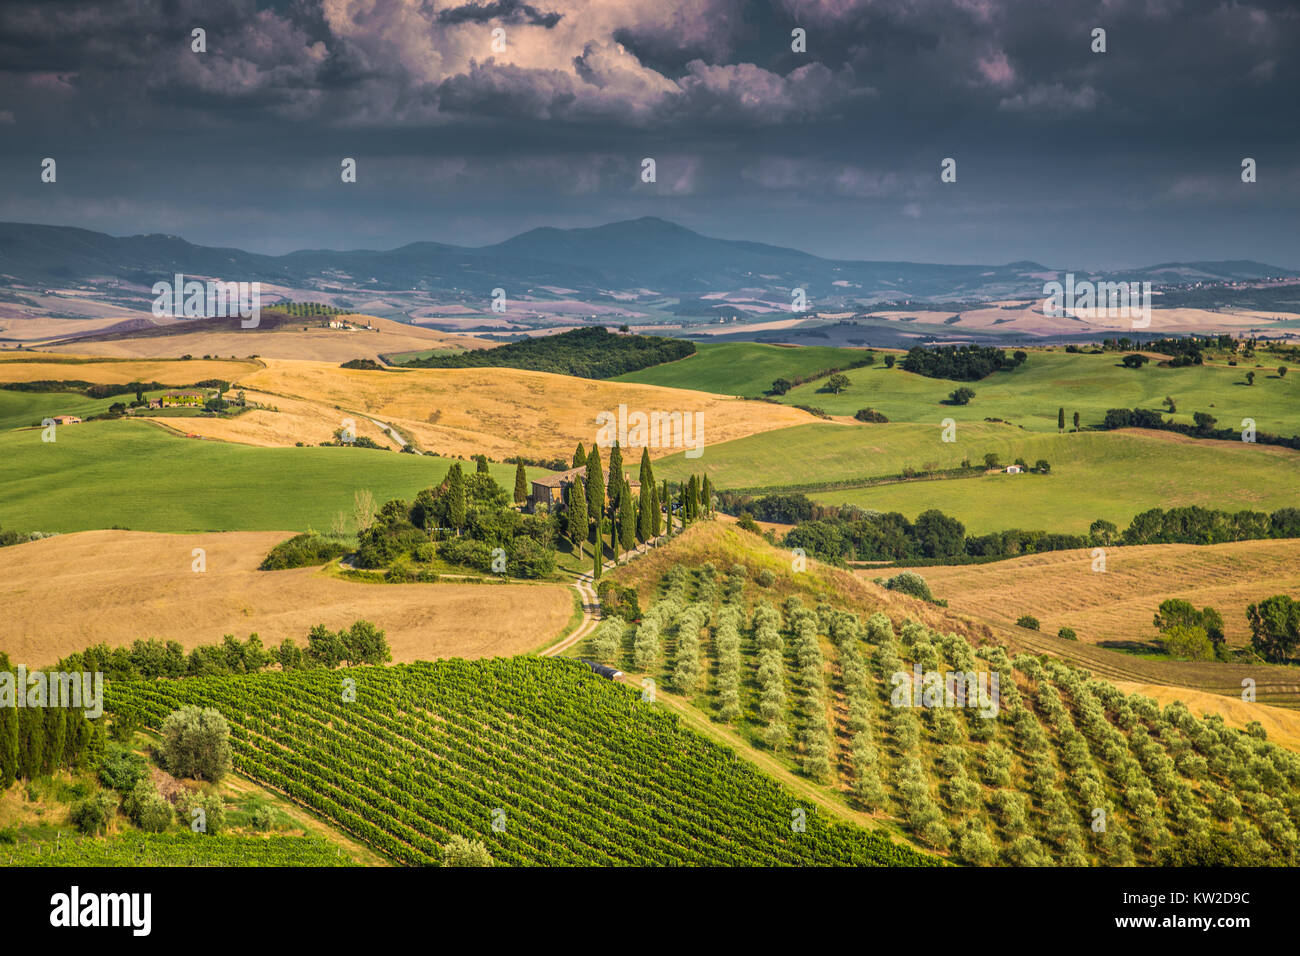 Scenic Tuscany landscape with rolling hills and valleys in golden evening light, Val d'Orcia, Italy Stock Photo